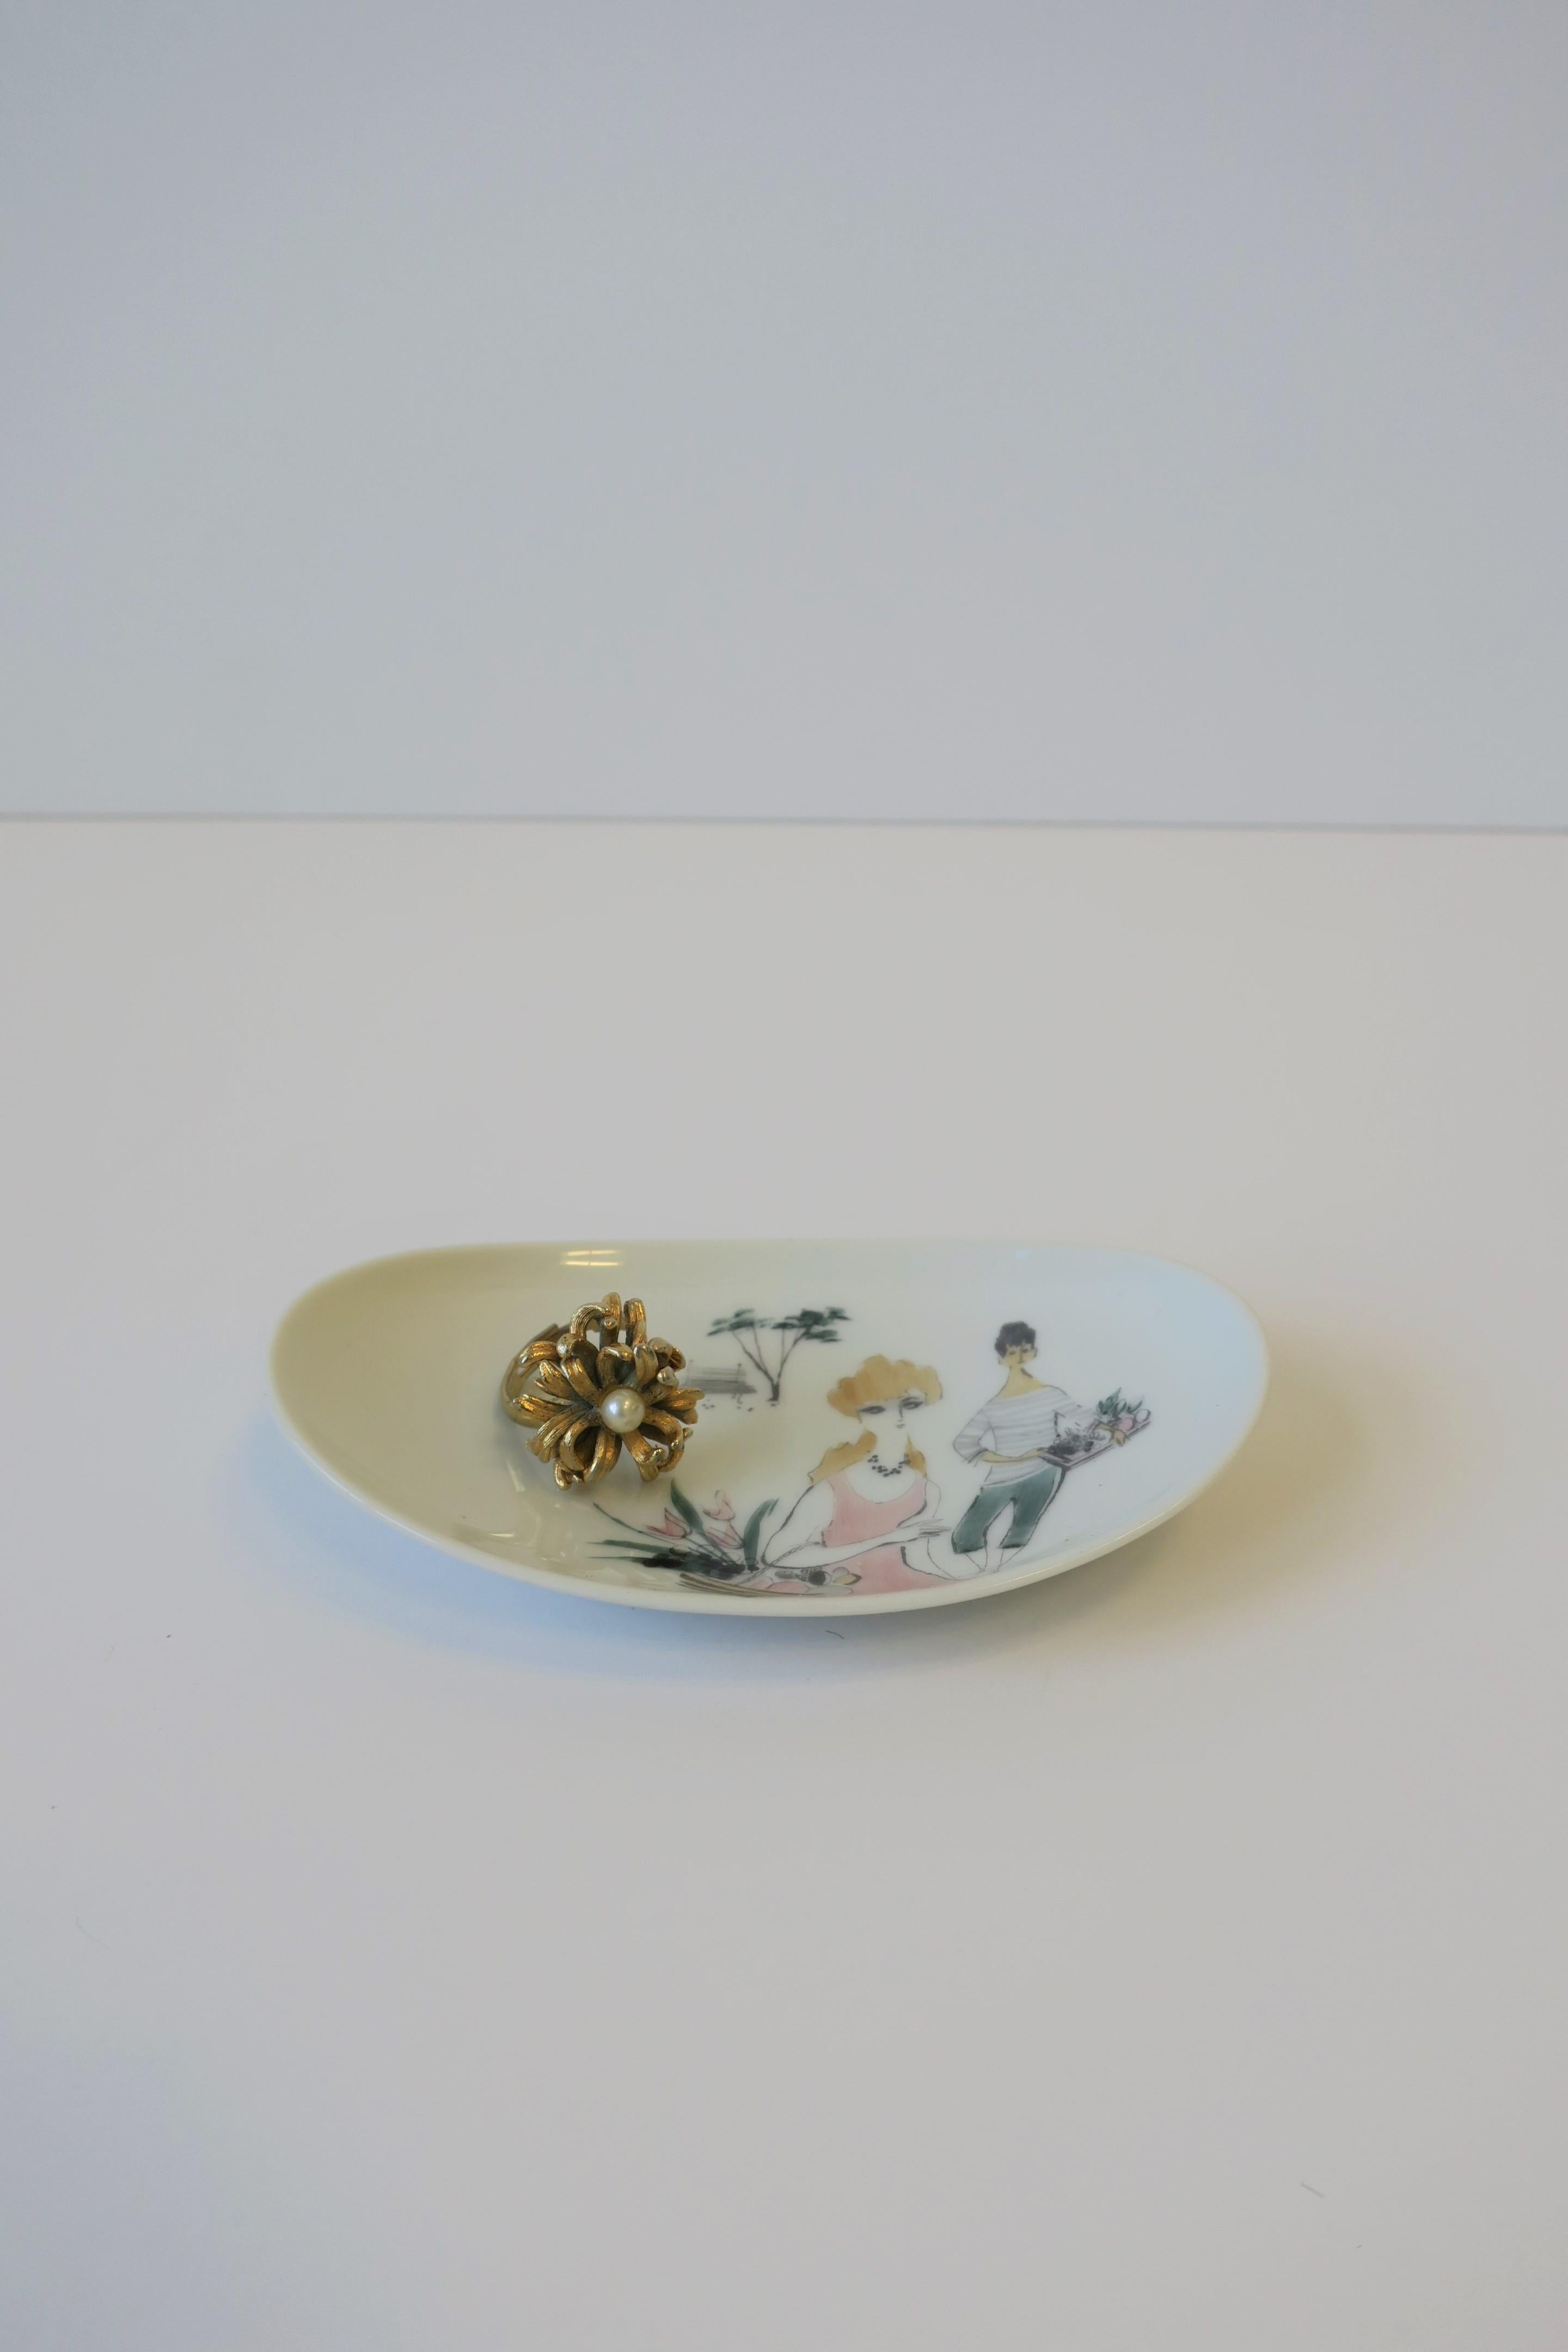 Glazed Female Figures White Porcelain Jewelry Dish by Rosenthal, 20th Century For Sale